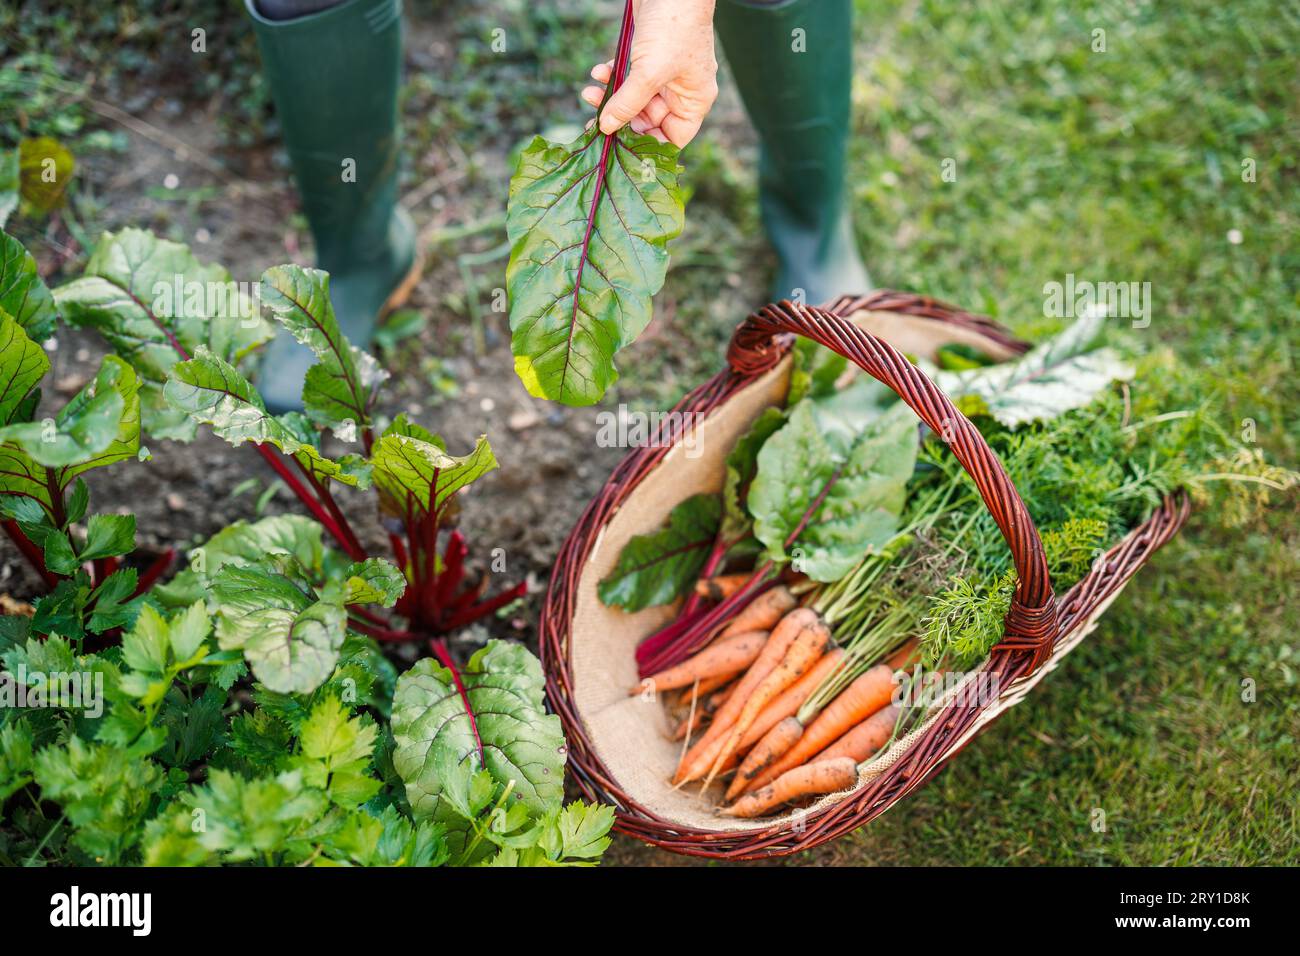 Harvesting mangold leaves and carrots from her organic vegetable garden Stock Photo